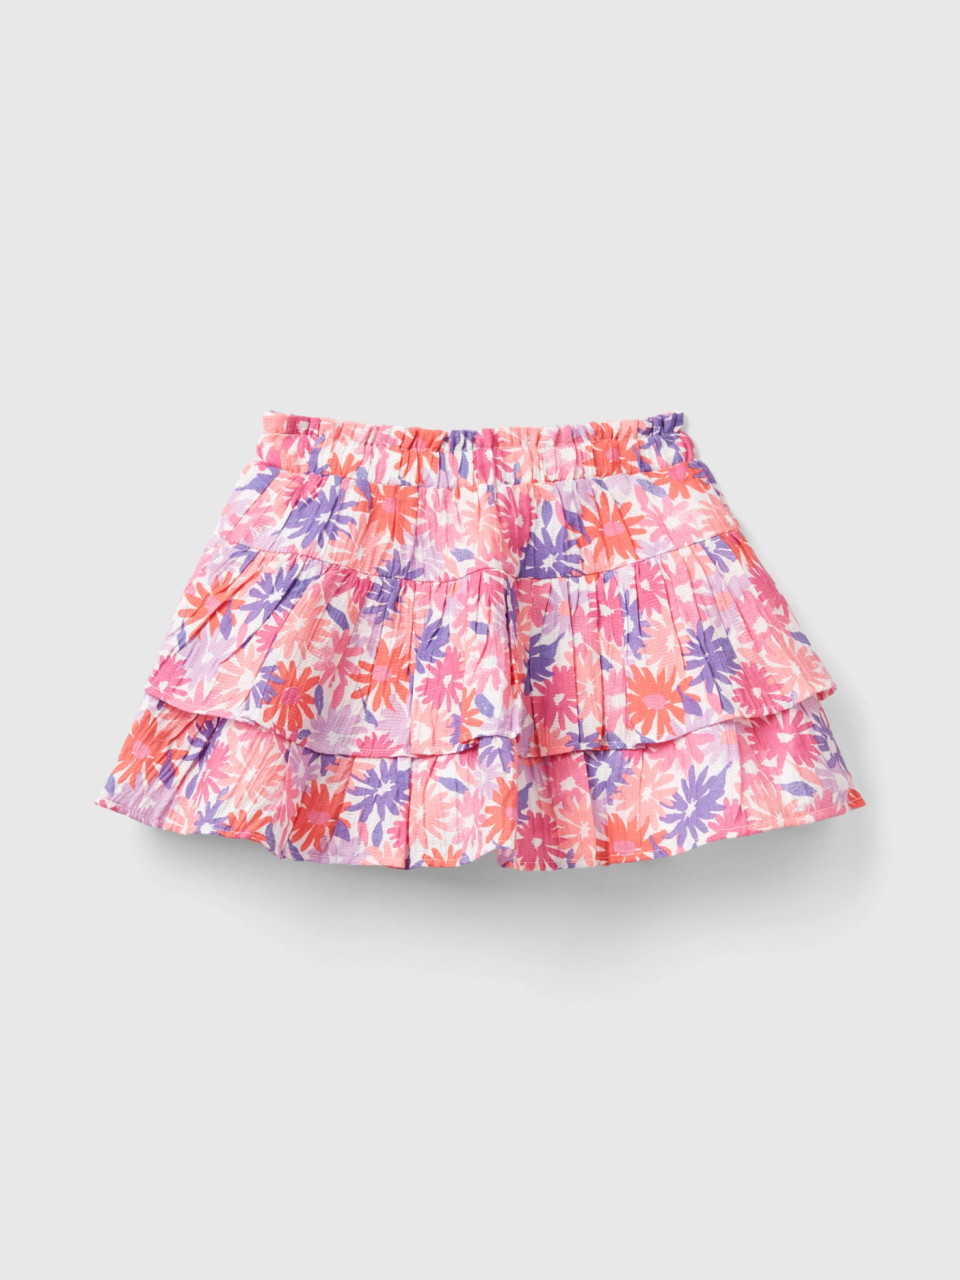 Benetton, Skirt With Floral Print, Multi-color, Kids